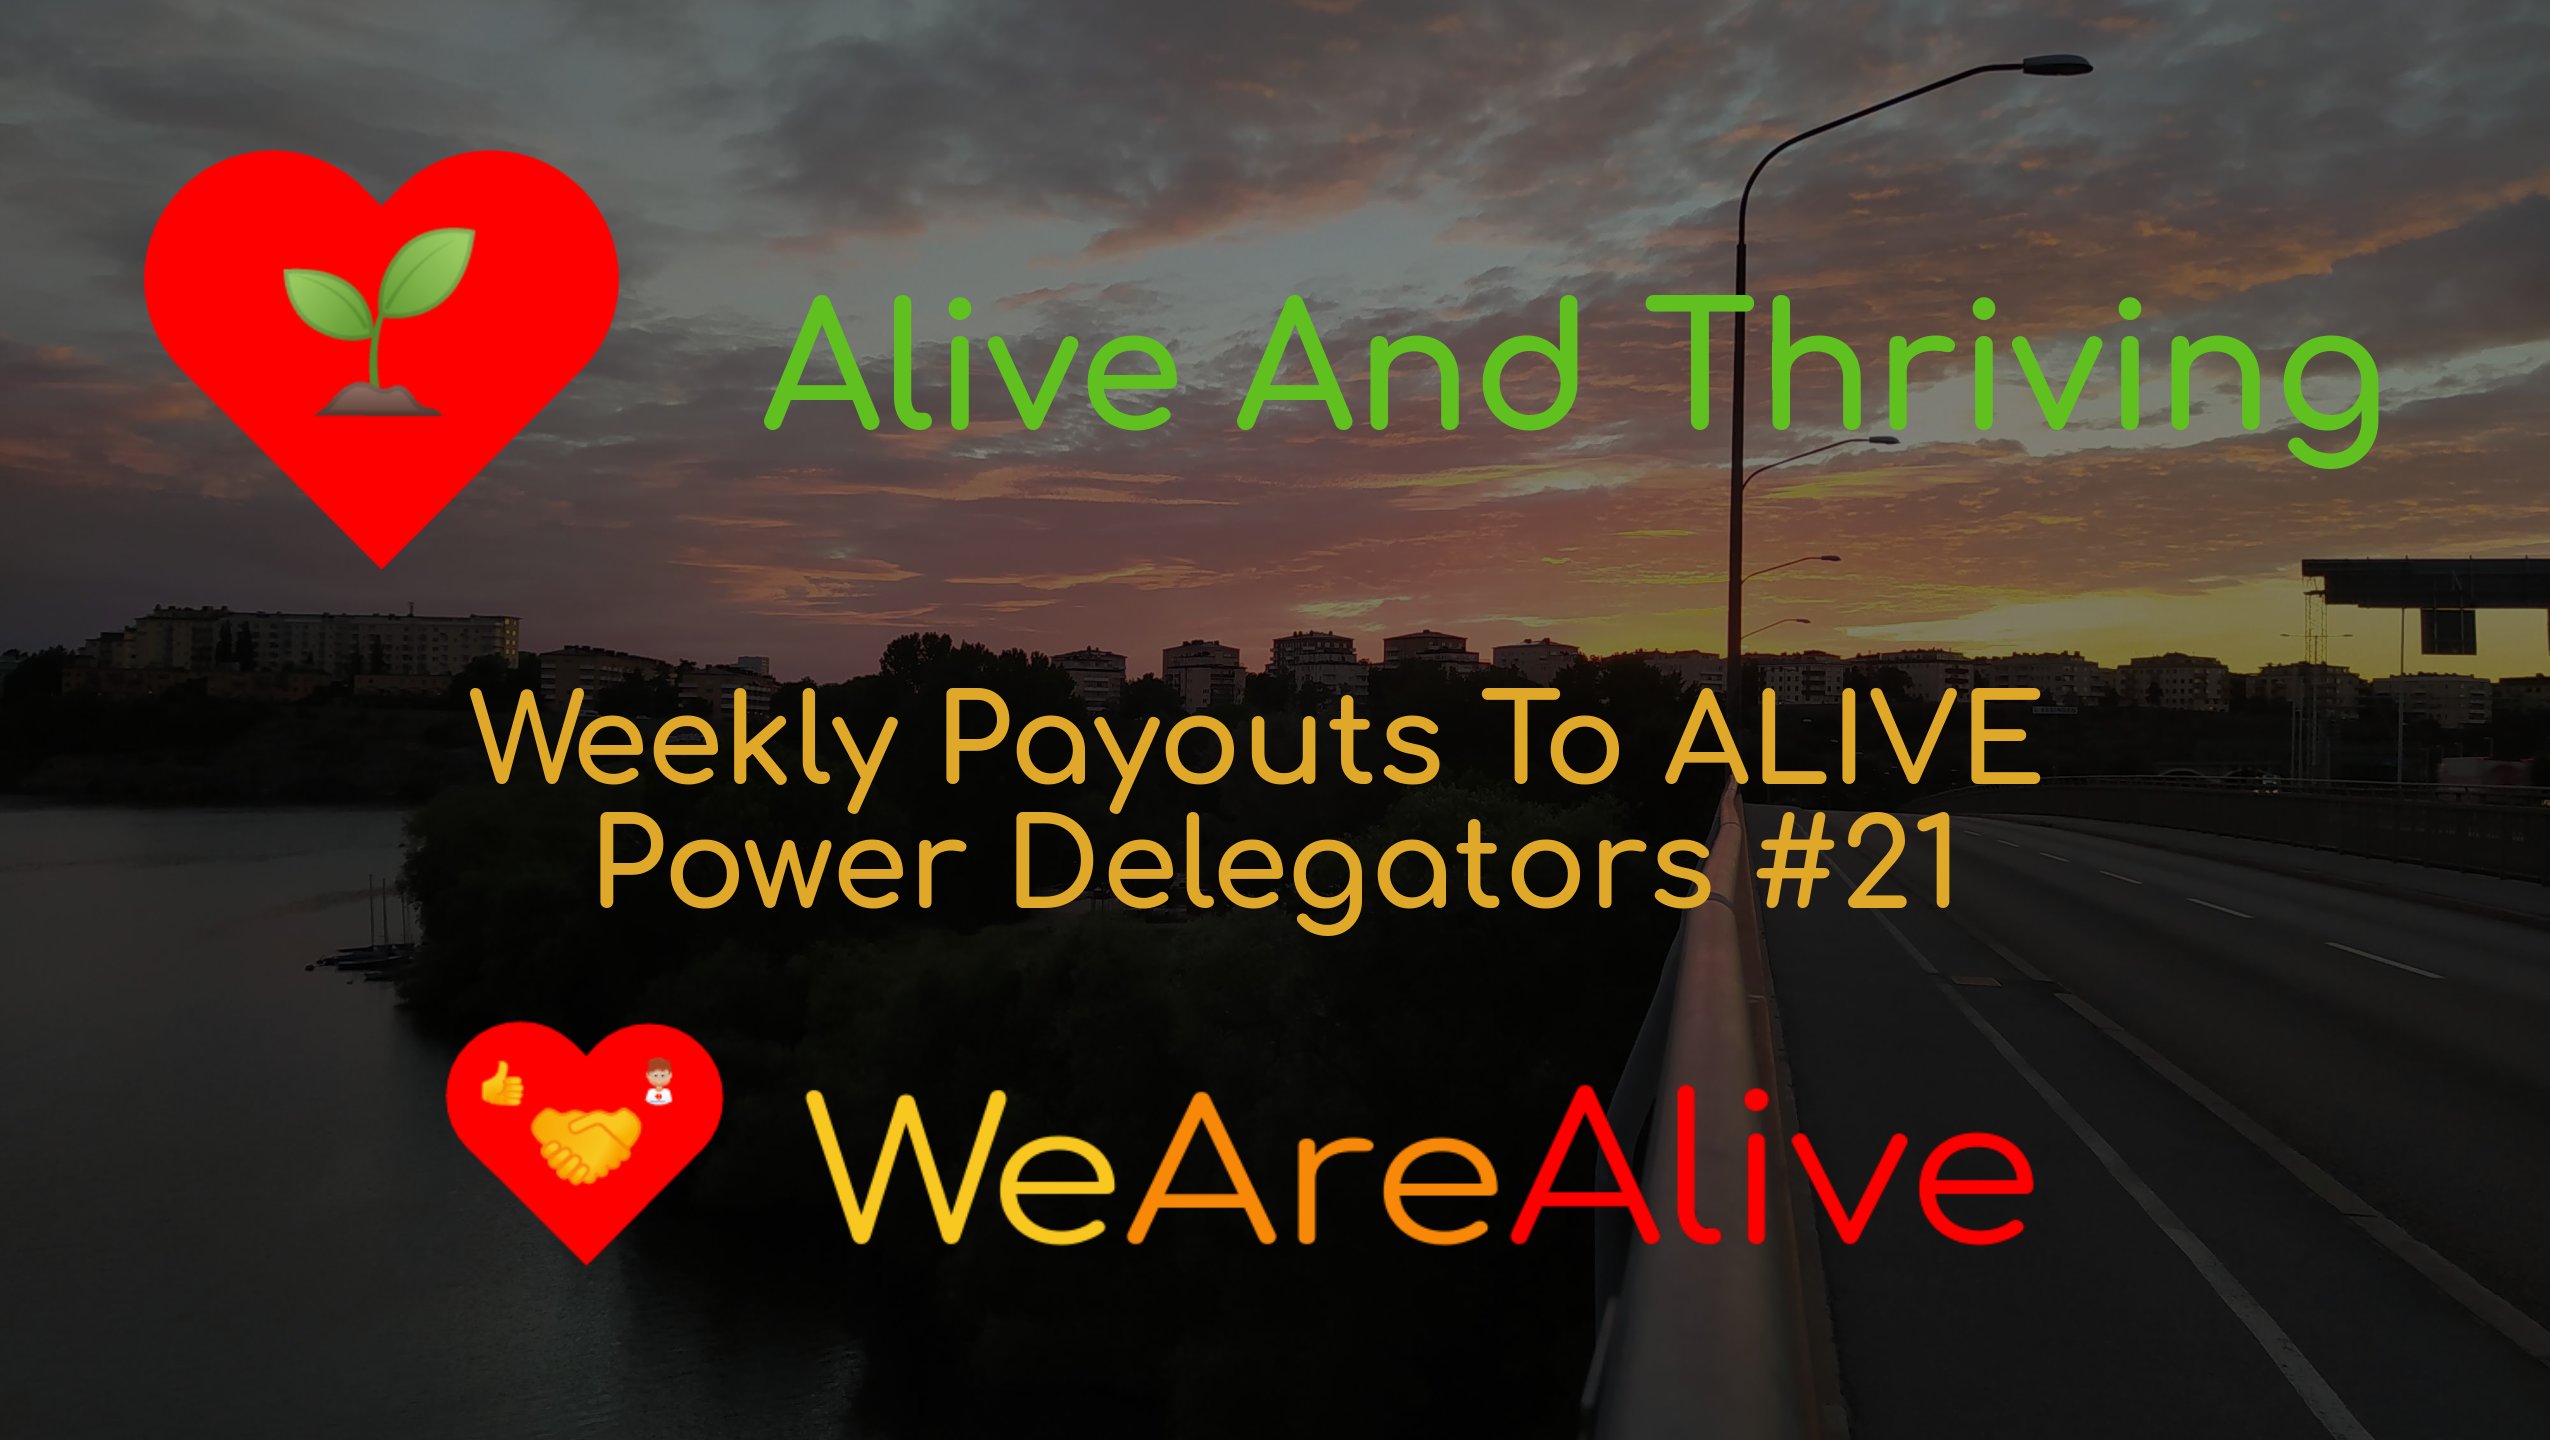 @wearealive/alive-and-thriving-weekly-payouts-to-alive-power-delegators-21